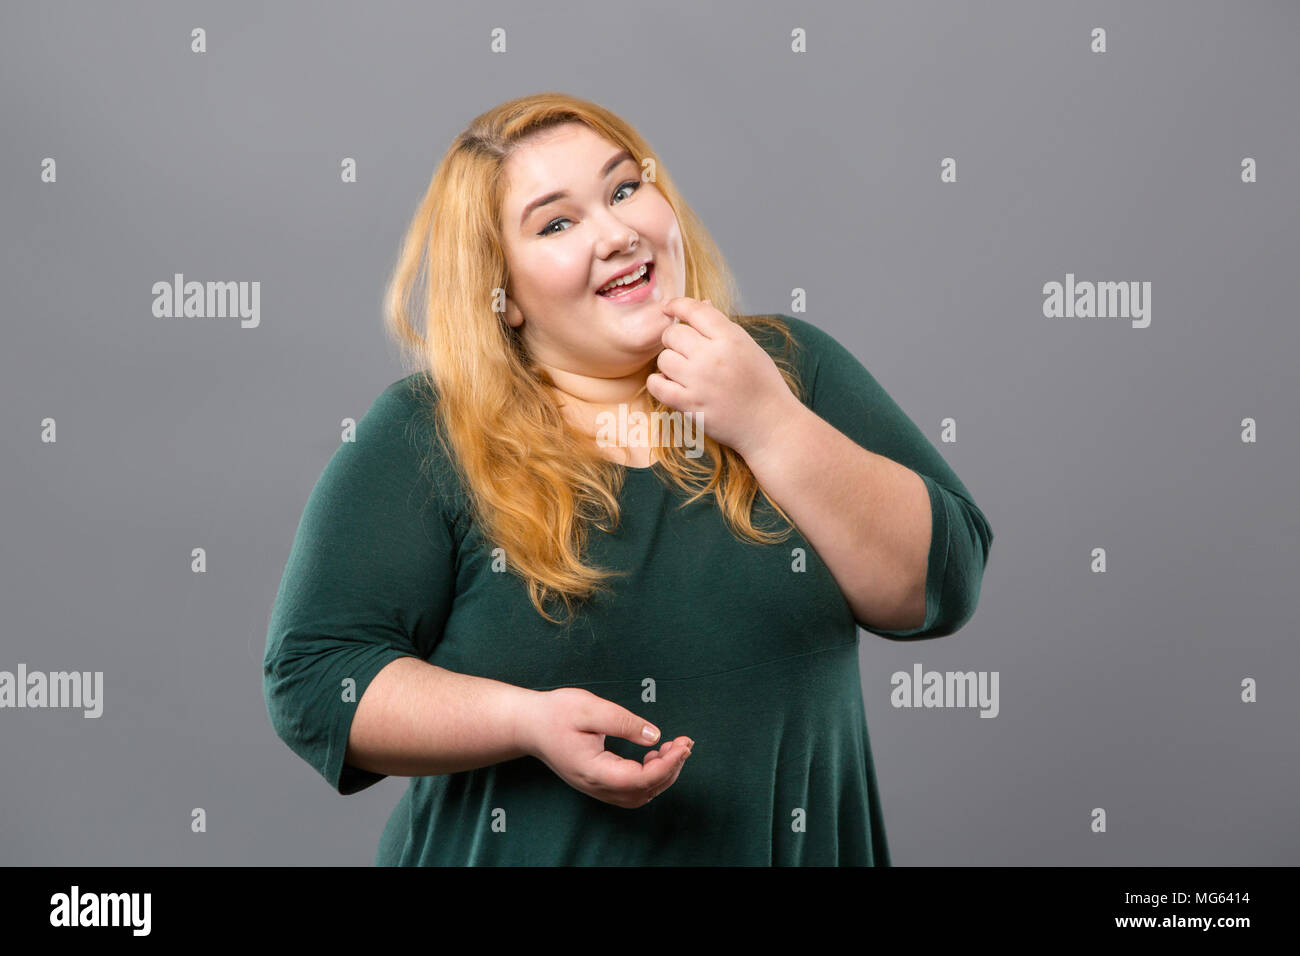 Pleasant obese woman looking at you Stock Photo